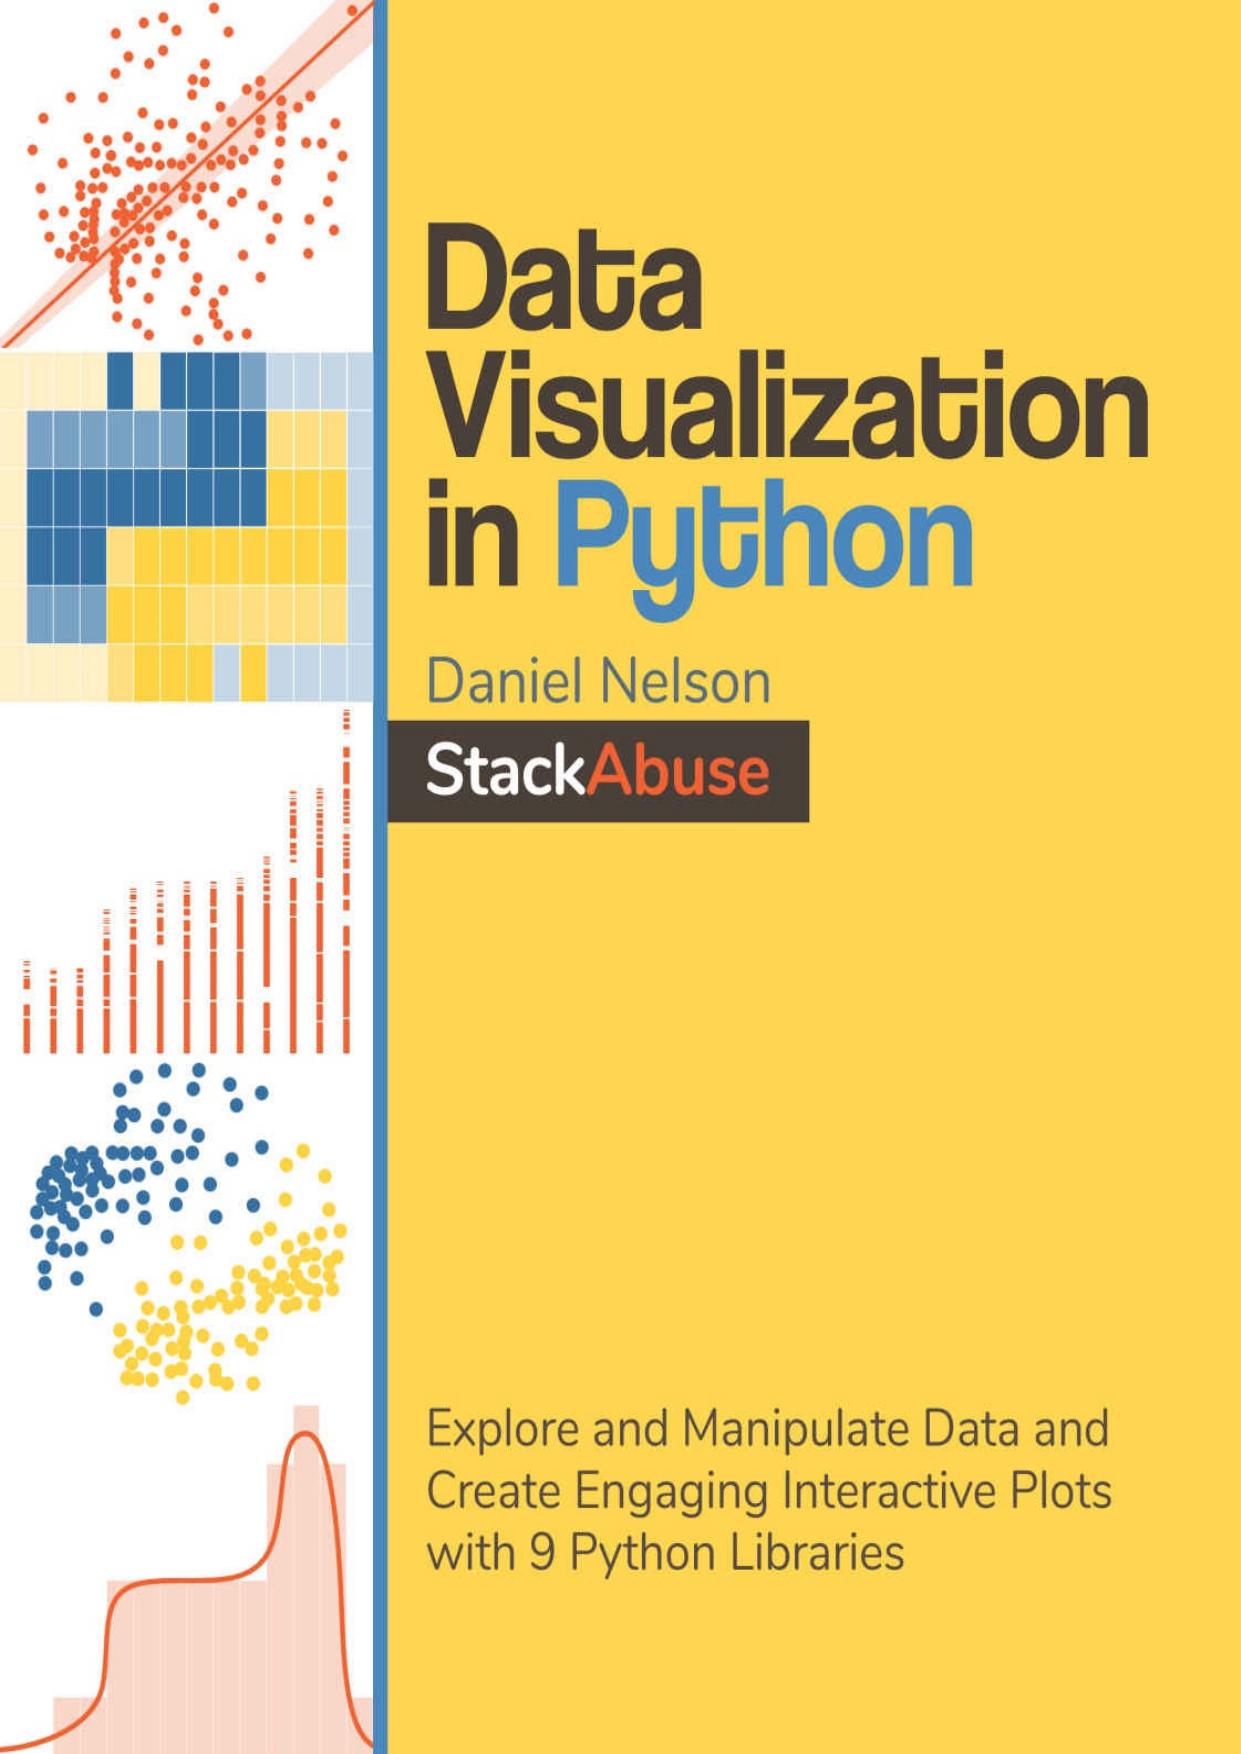 Data Visualization in Python: Explore and Manipulate Data and Create Engaging Interactive Plots with 9 Python Libraries